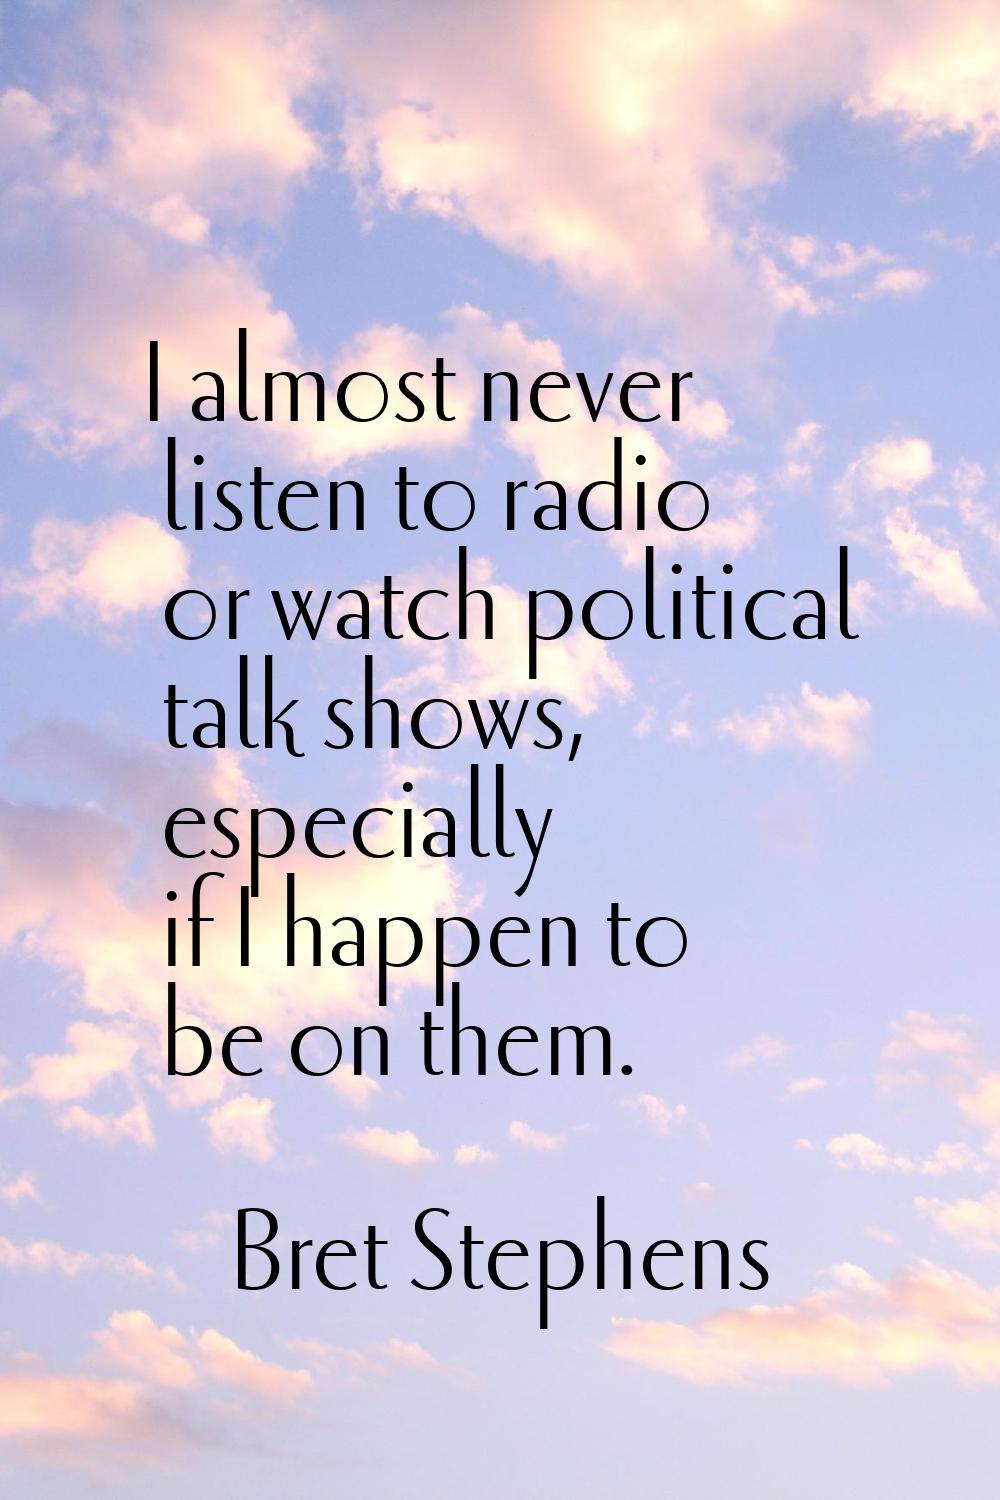 I almost never listen to radio or watch political talk shows, especially if I happen to be on them.